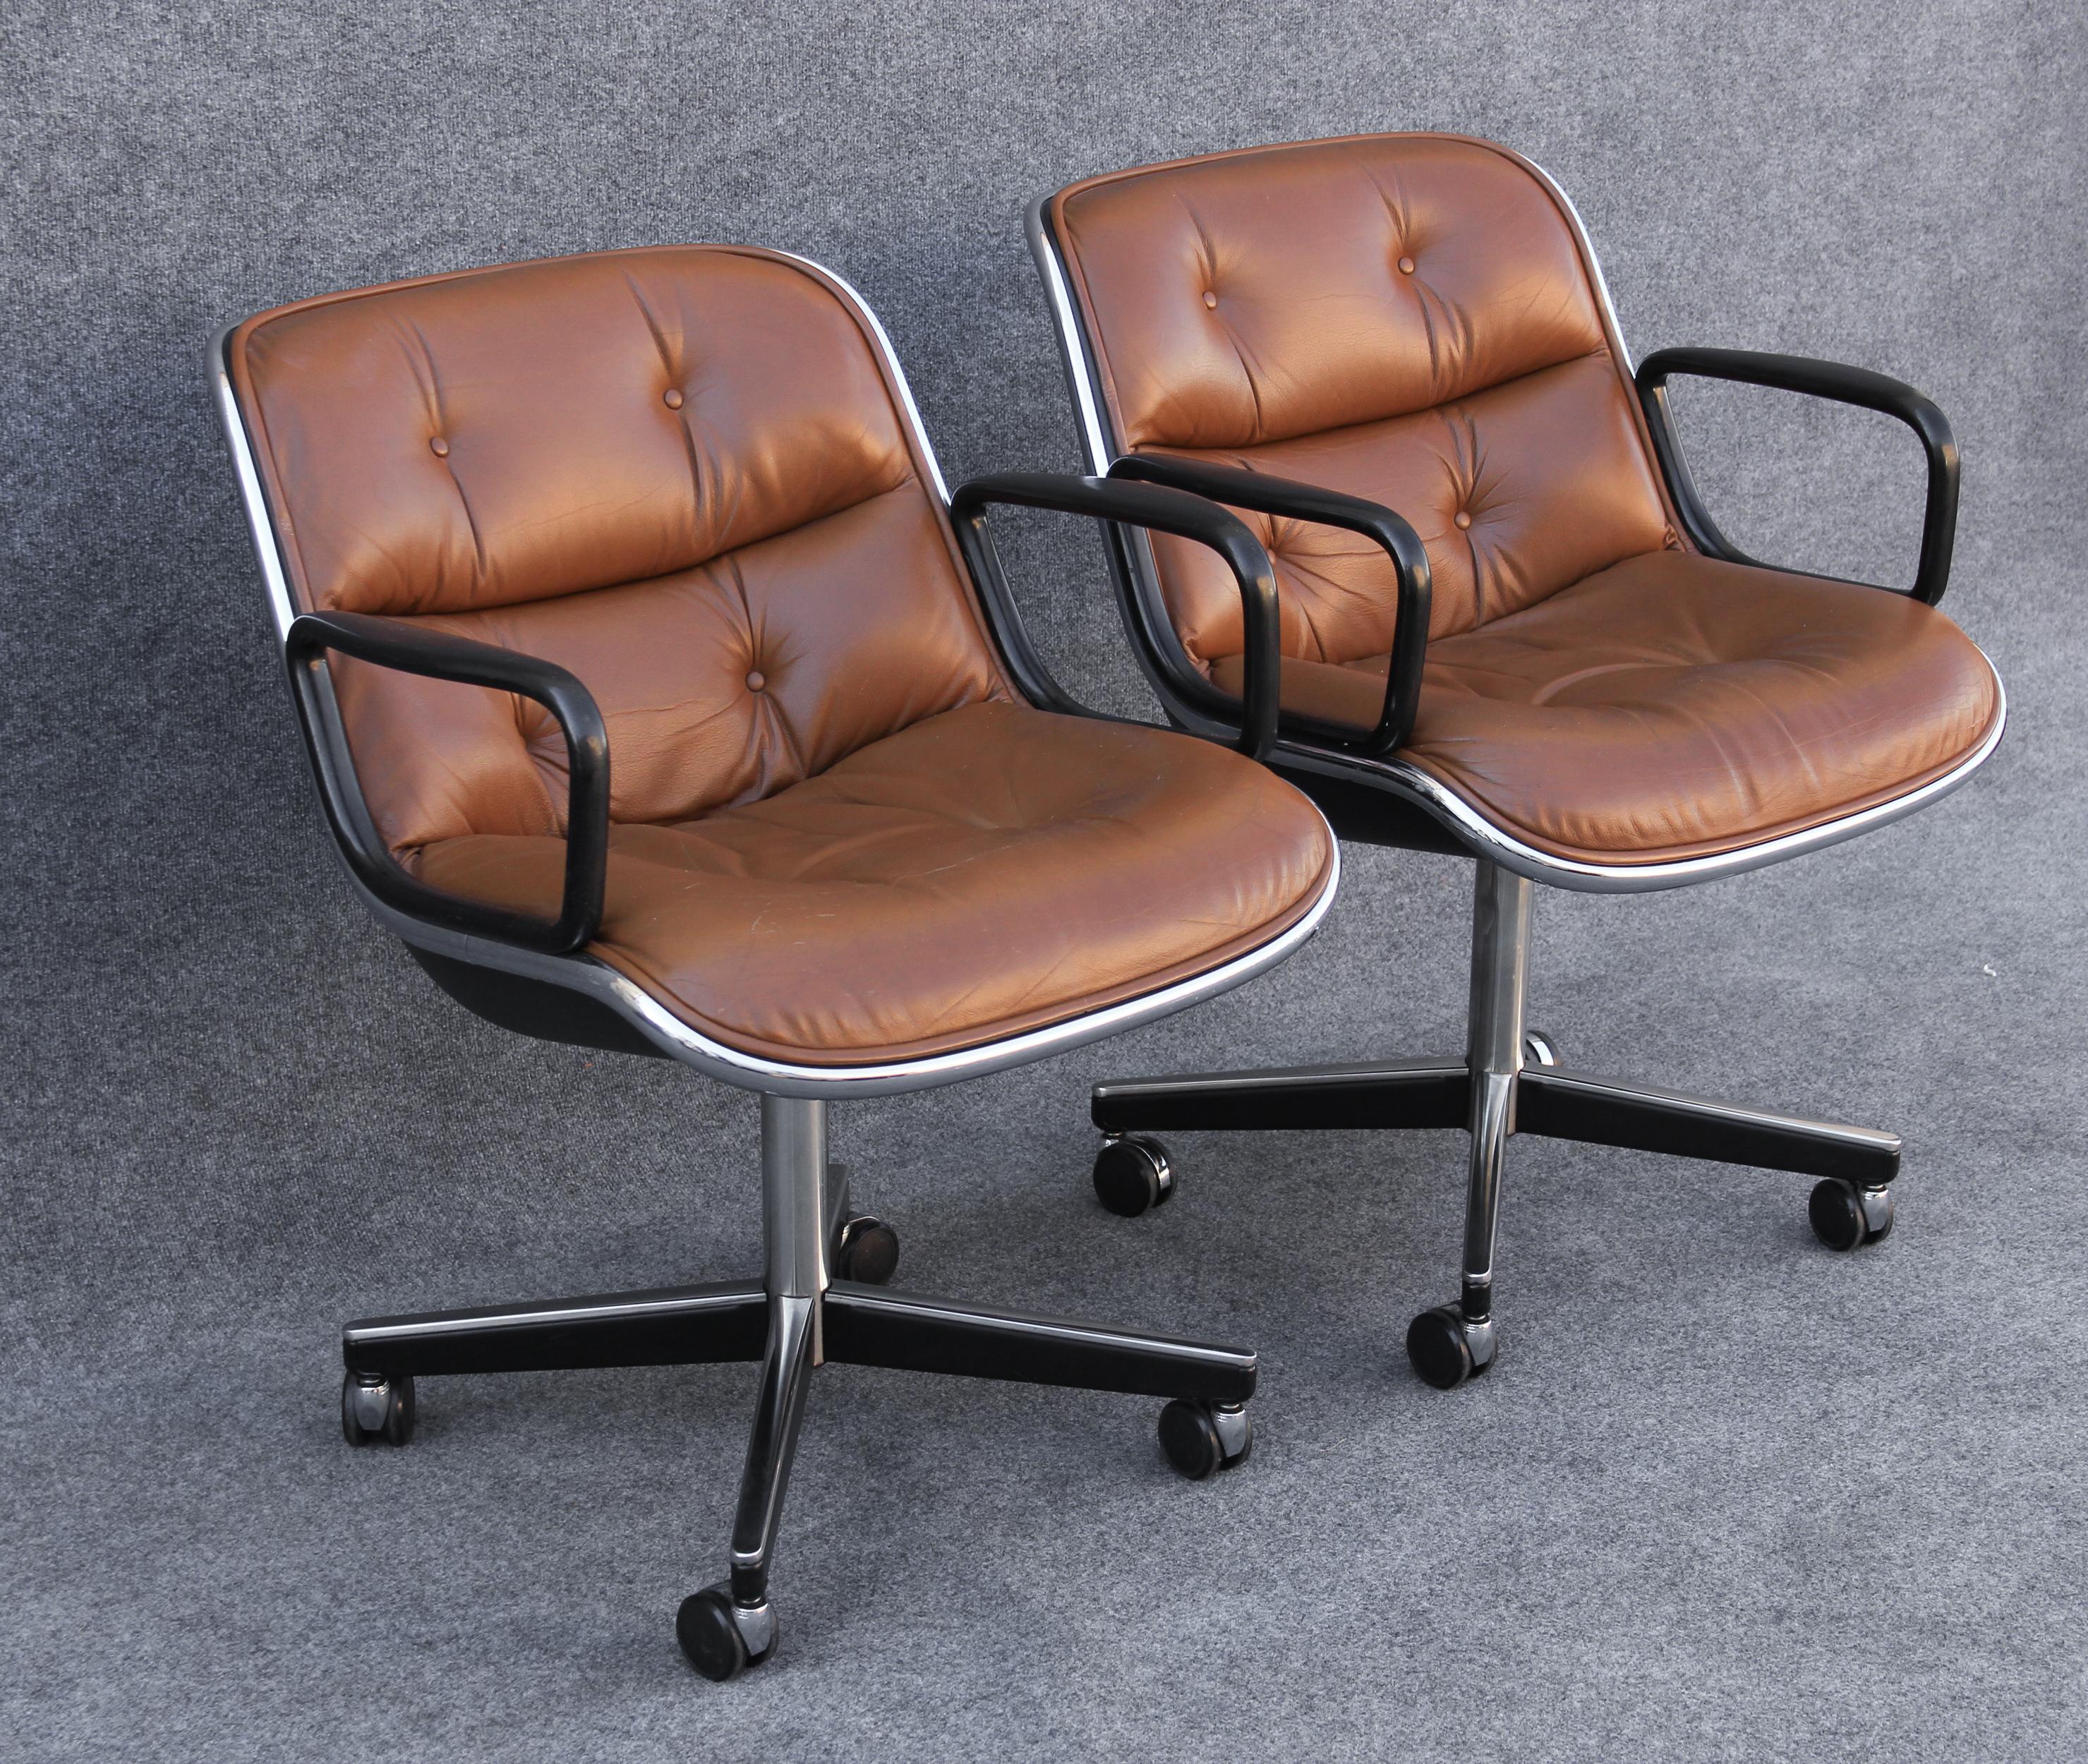 American Pair of Charles Pollock for Knoll Arm or Desk Chairs in Brown Leather & Black